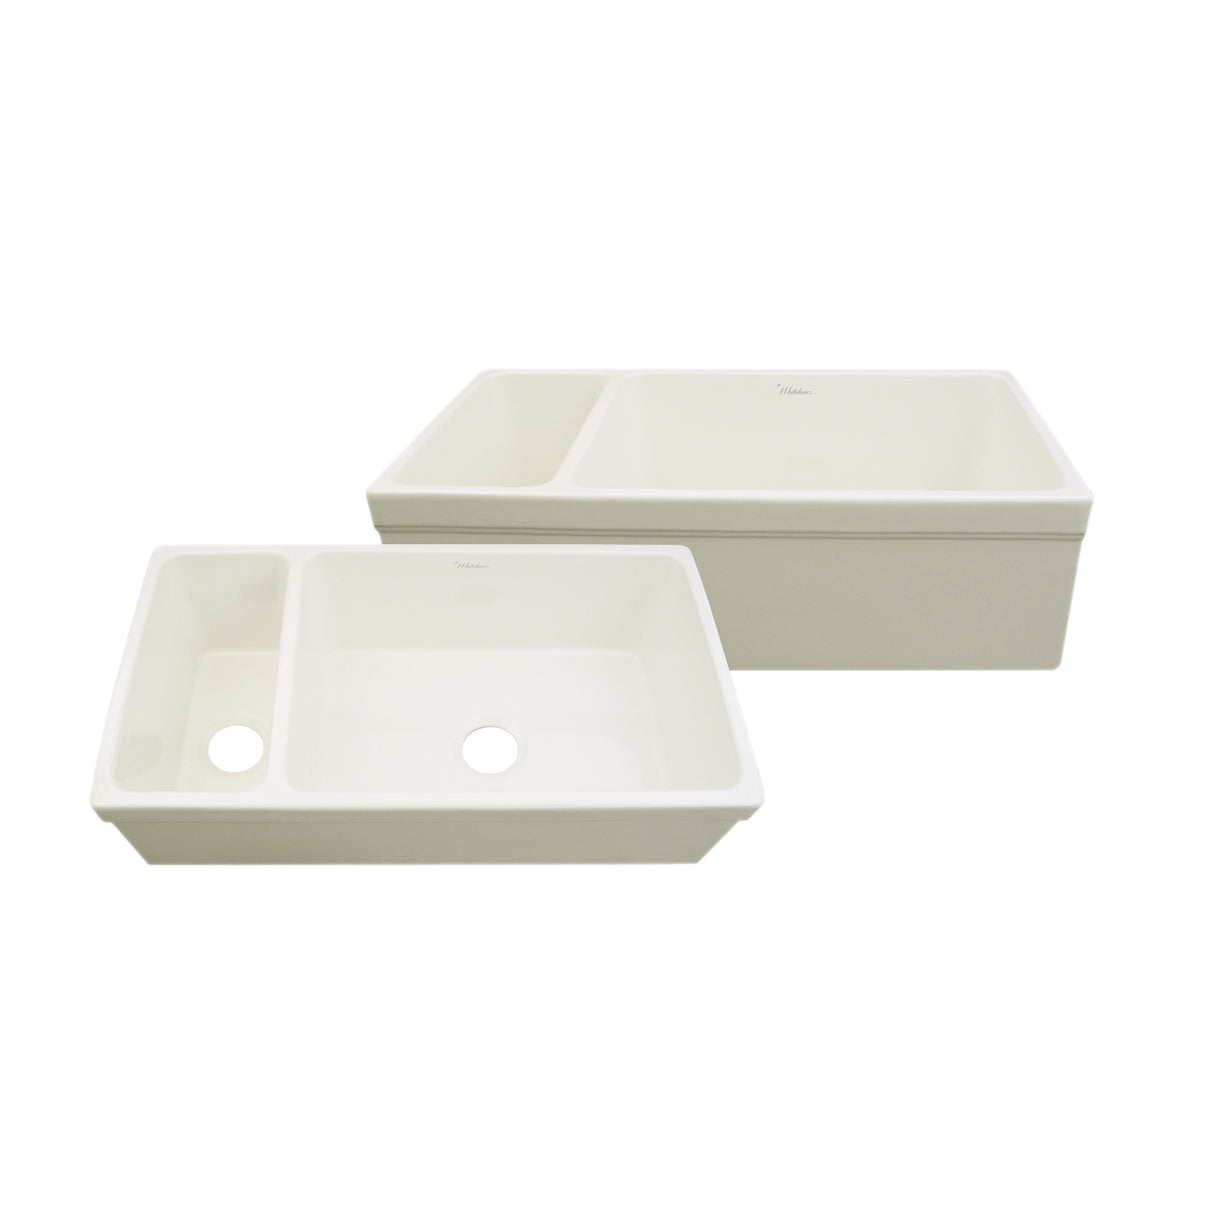 Farmhaus Fireclay Quatro Alcove Large Reversible Sink and Small Bowl with Decorative 2 ½" Lip on Both Sides